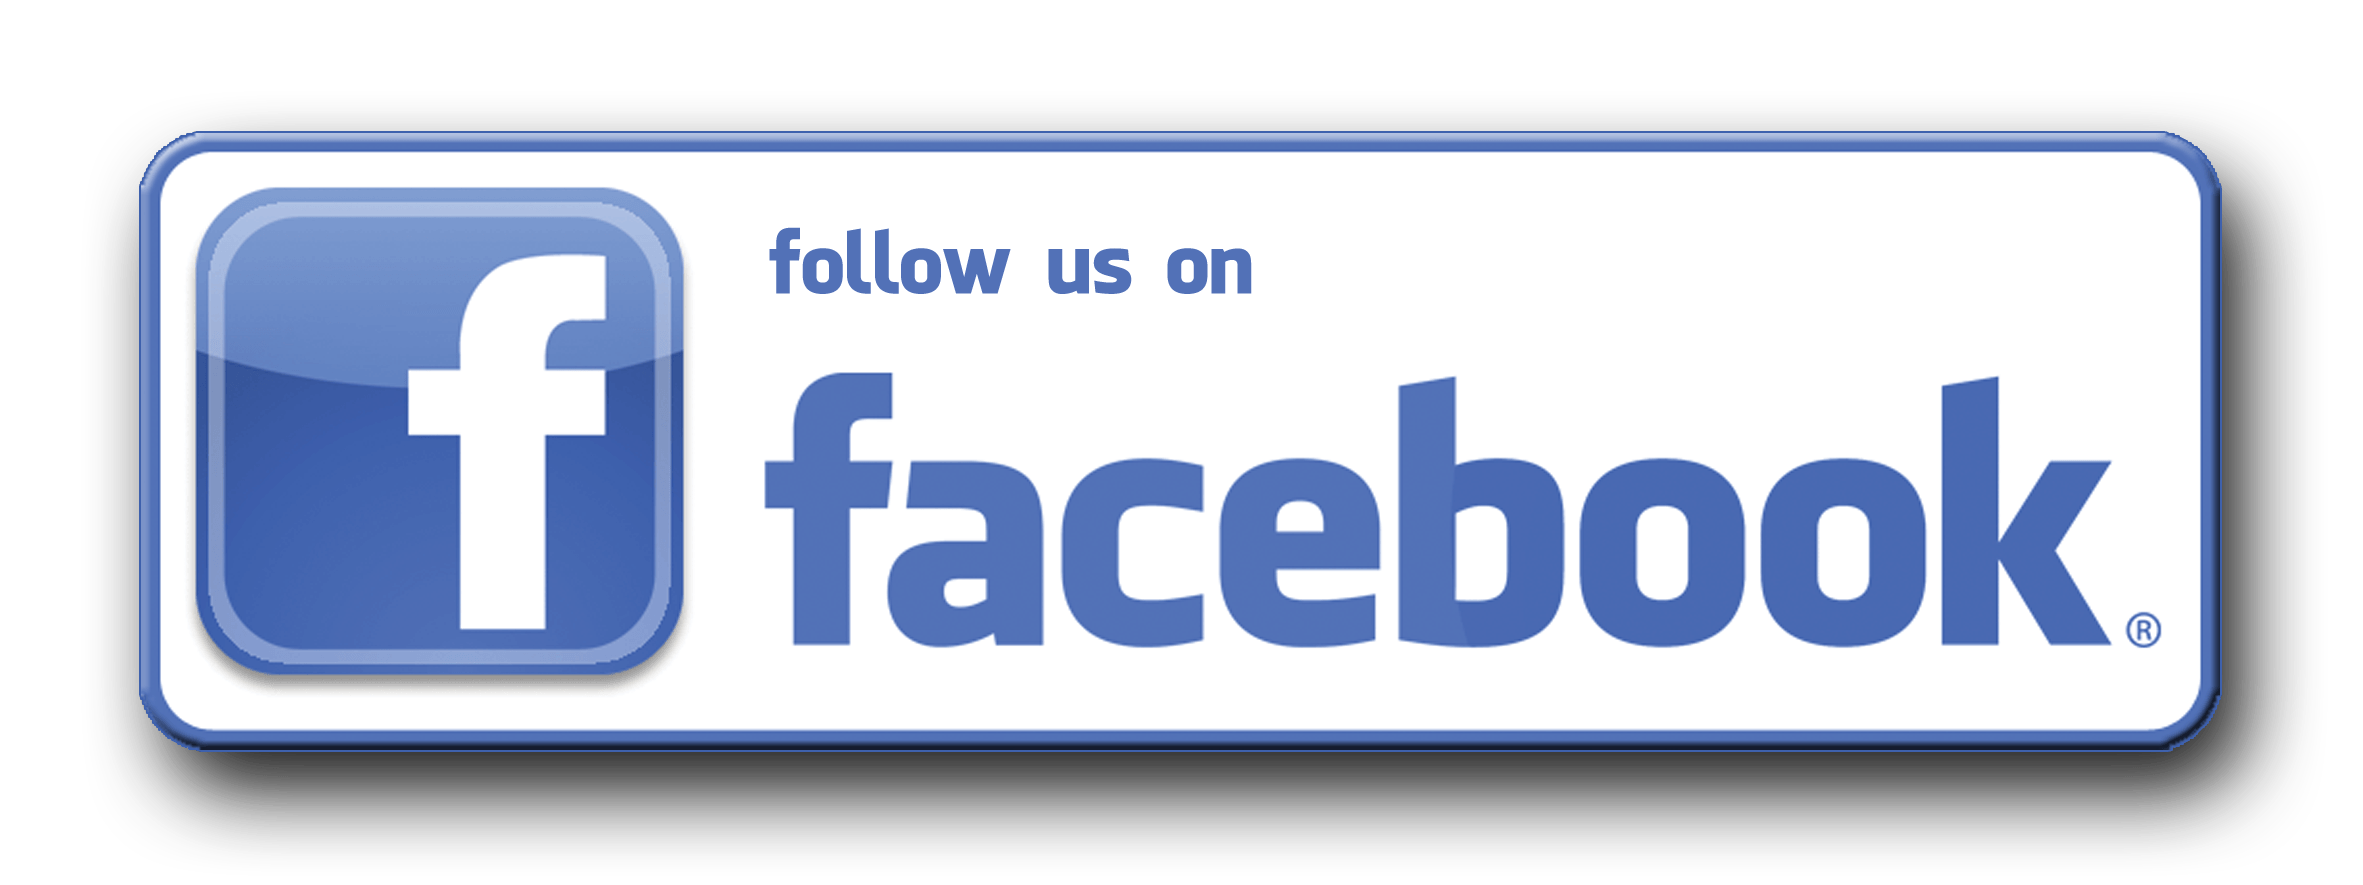 Follow Us On Facebook Logo - Landscape and Nature Discoveries, Inc.